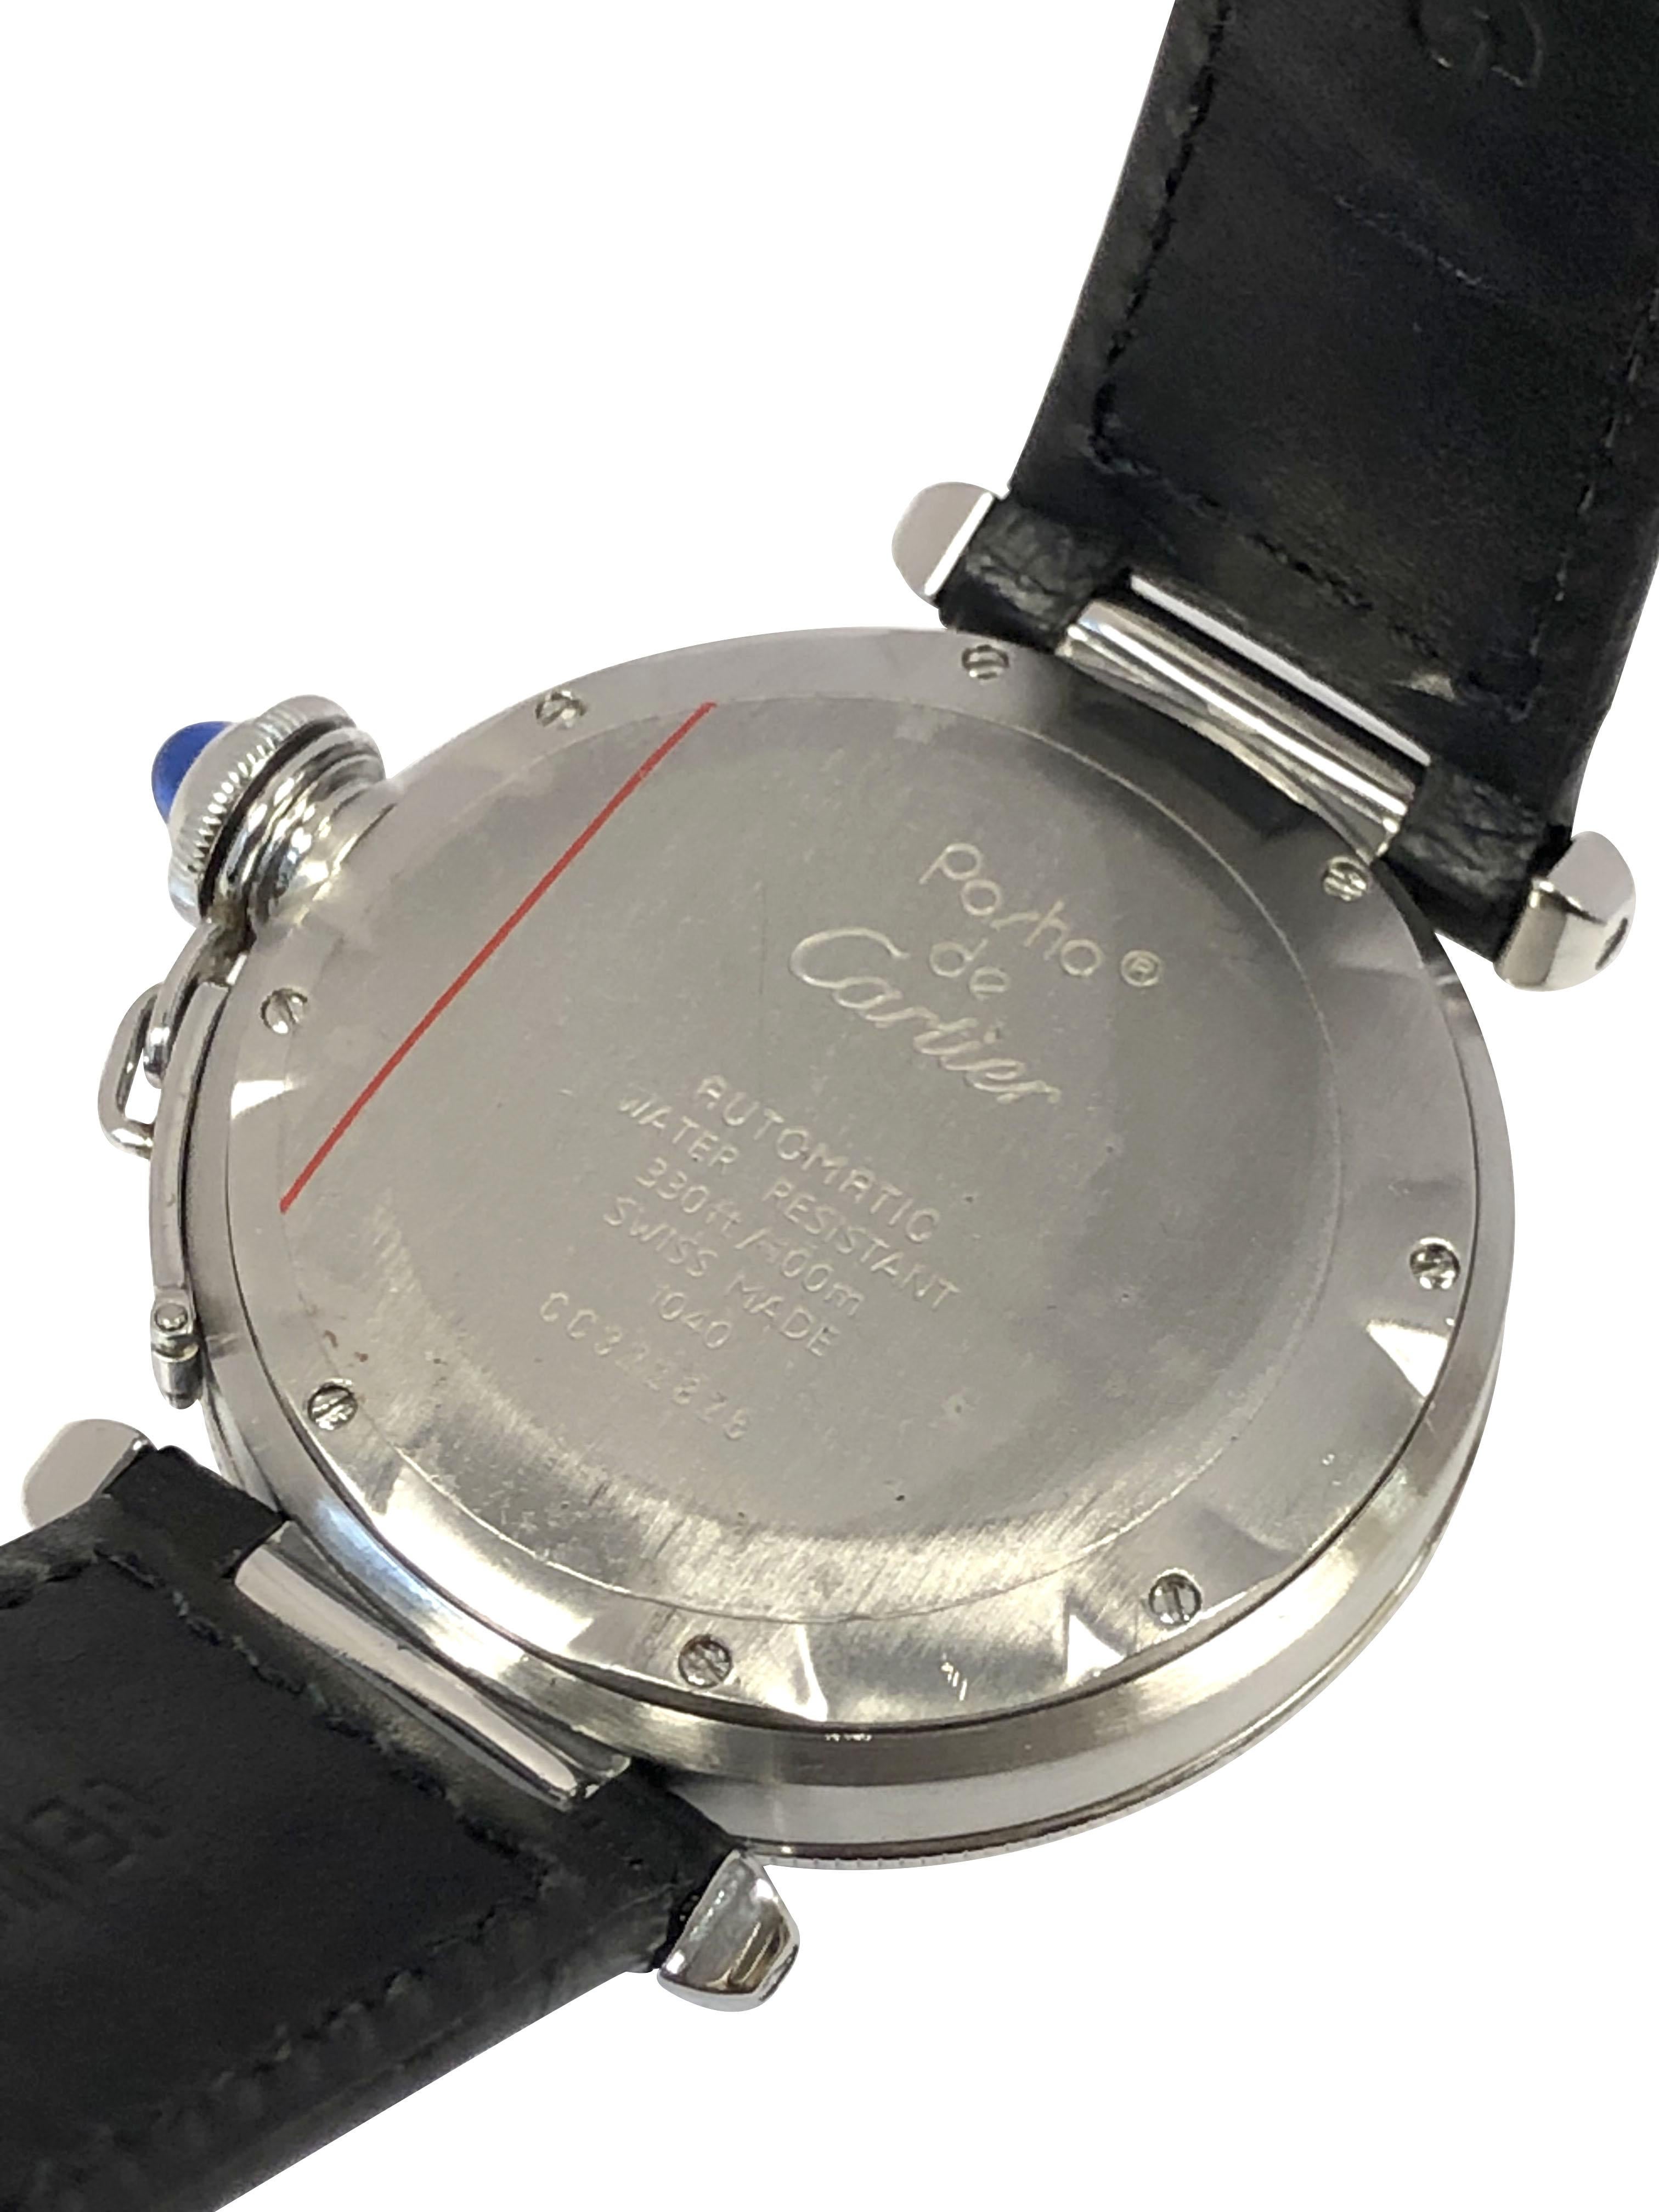 Circa 2005 Cartier Pasha Wrist Watch, 38 M.M. Stainless Steel 3 piece water resistant case with Rotating Bezel and Screw down Sapphire set crown. Automatic, Self winding movement, Gray textured dial with raised markers, a calendar window at the 5